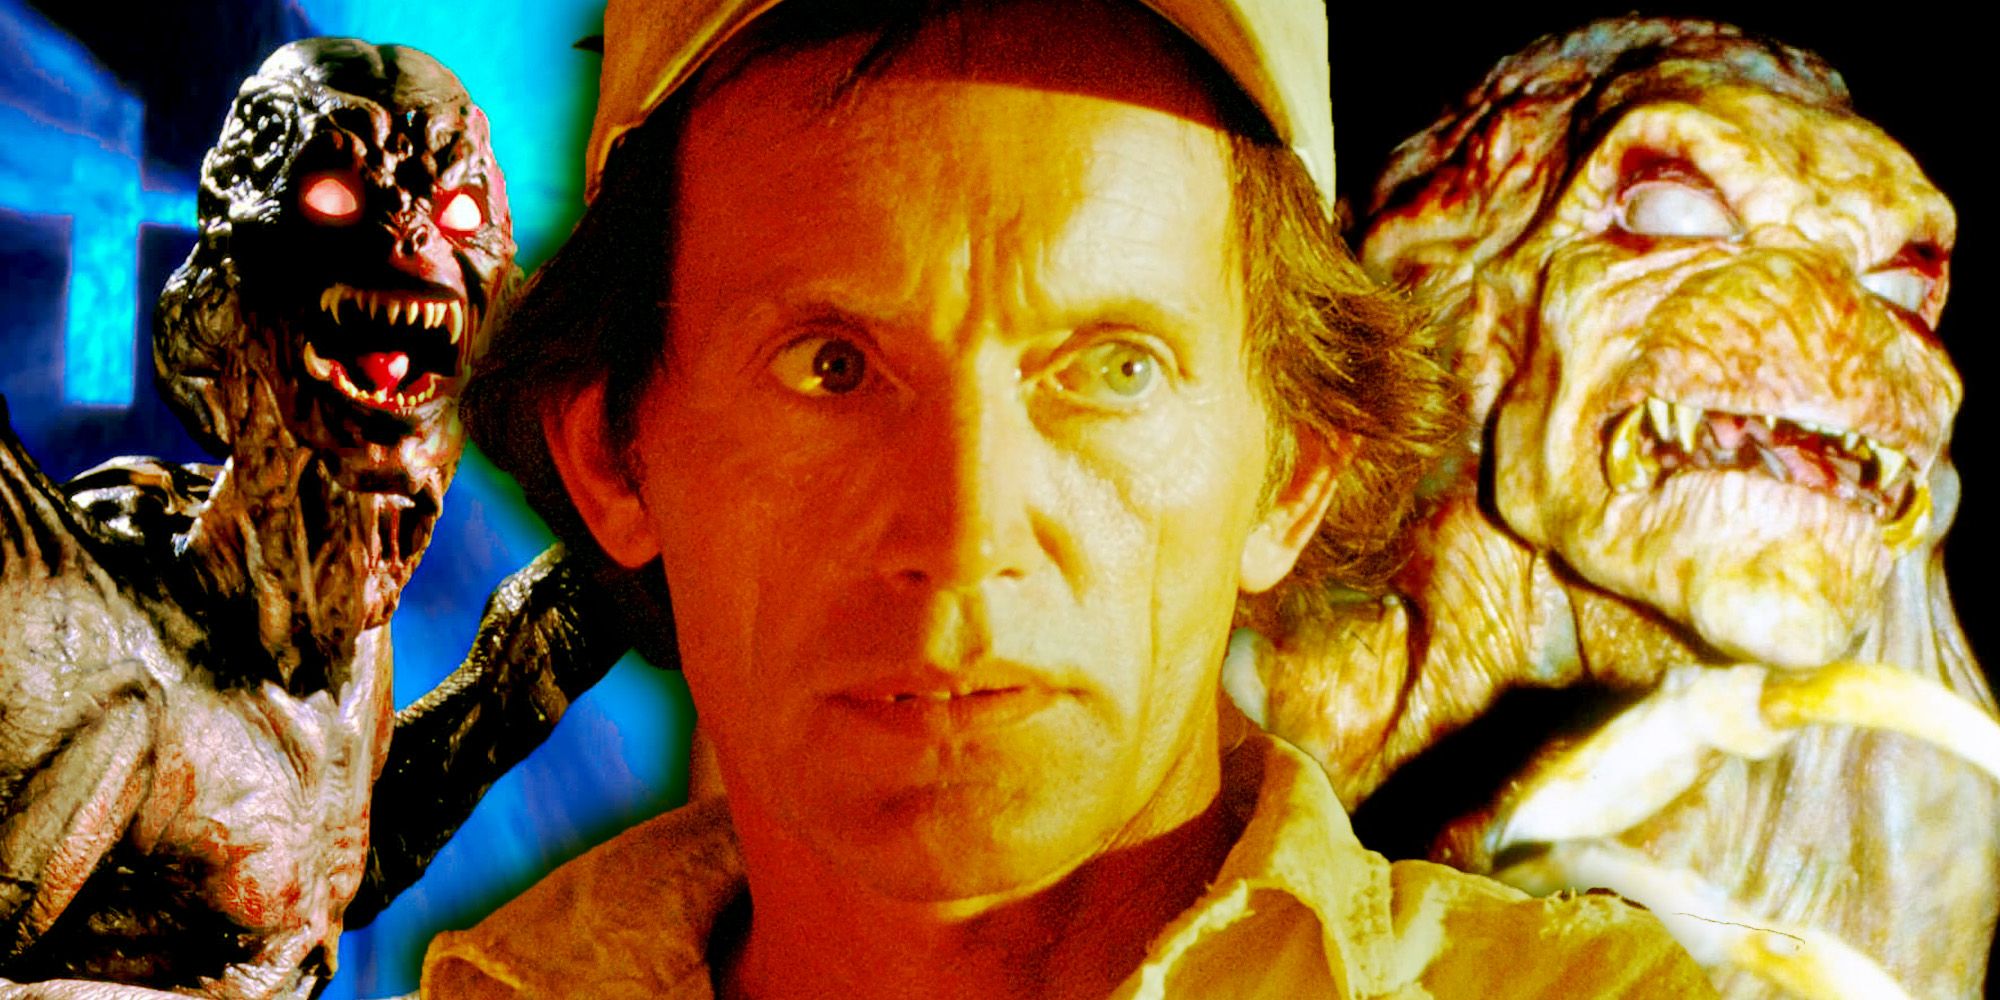 Pumpkinhead movie franchise collage including two images of the title creature and Lance Henriksen in the center.